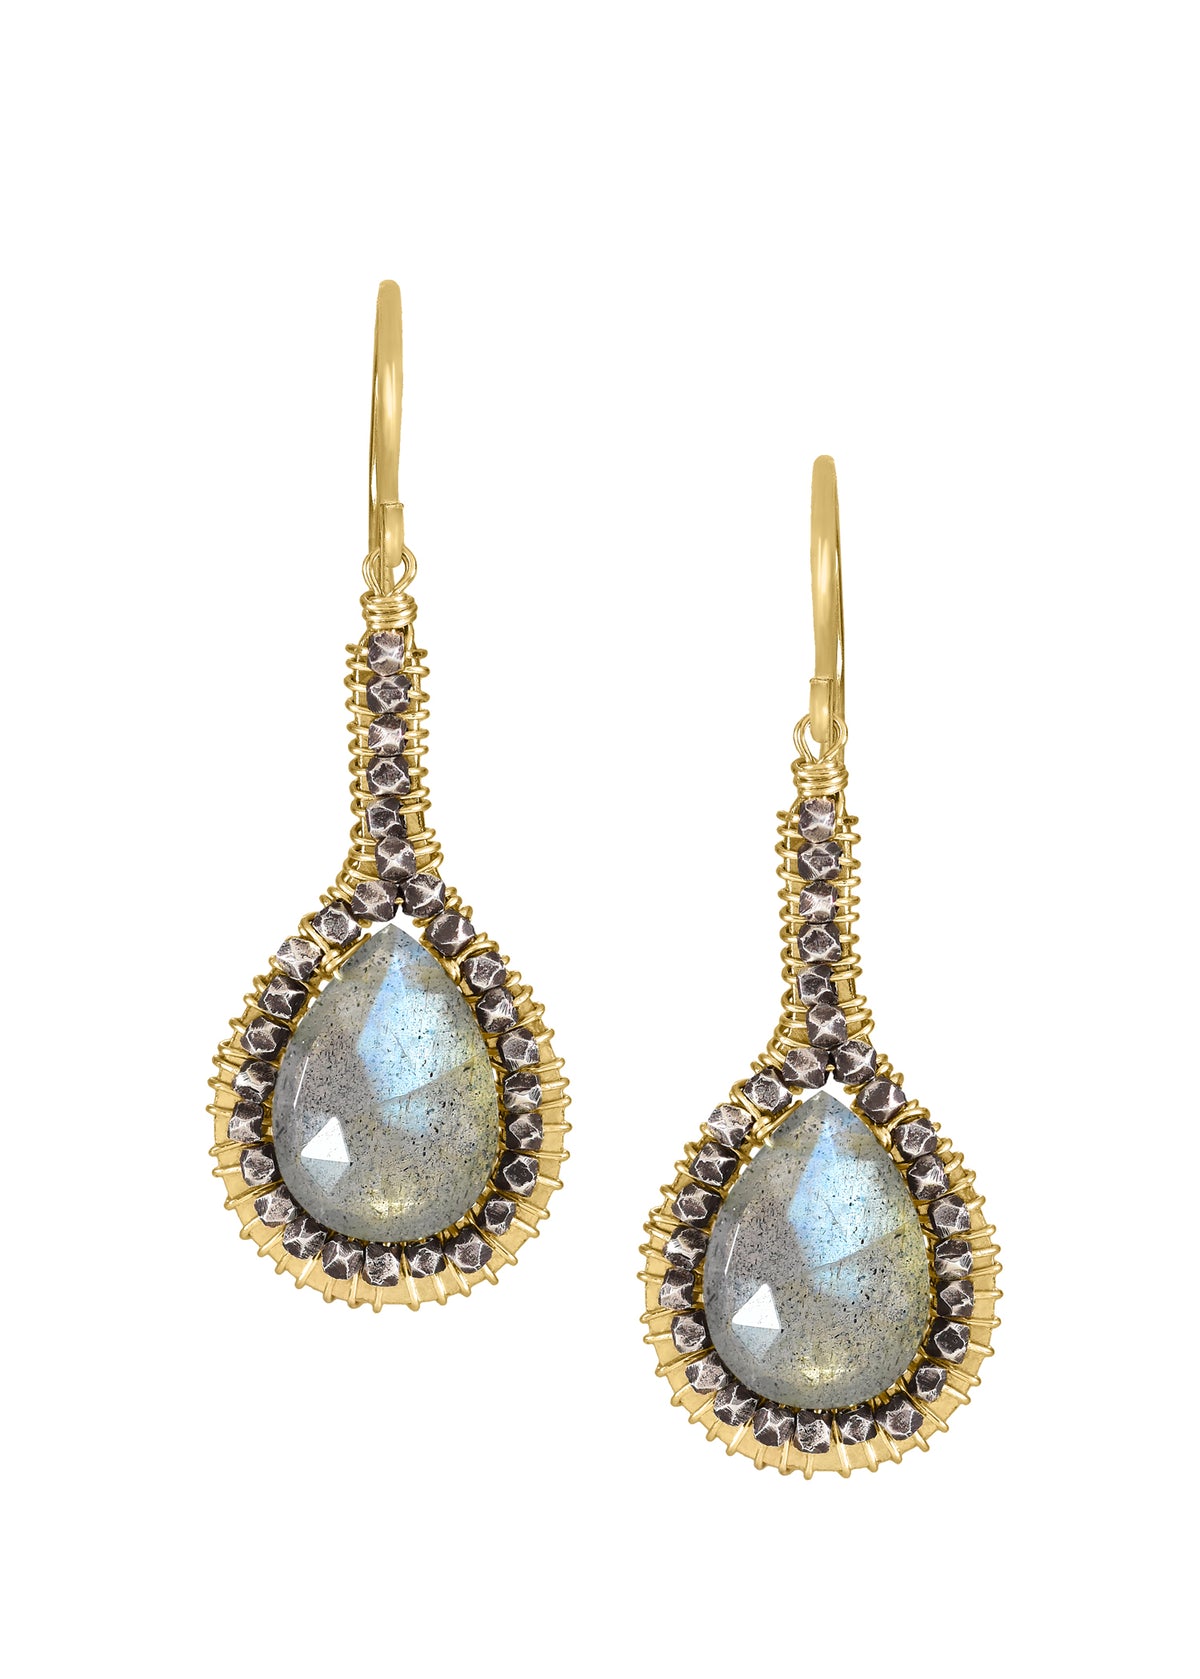 Labradorite Sterling silver 14k gold fill Mixed metal Earrings measure 1-1/2&quot; in length (including the ear wires) and 7/16&quot; in width at the widest point Handmade in our Los Angeles studio